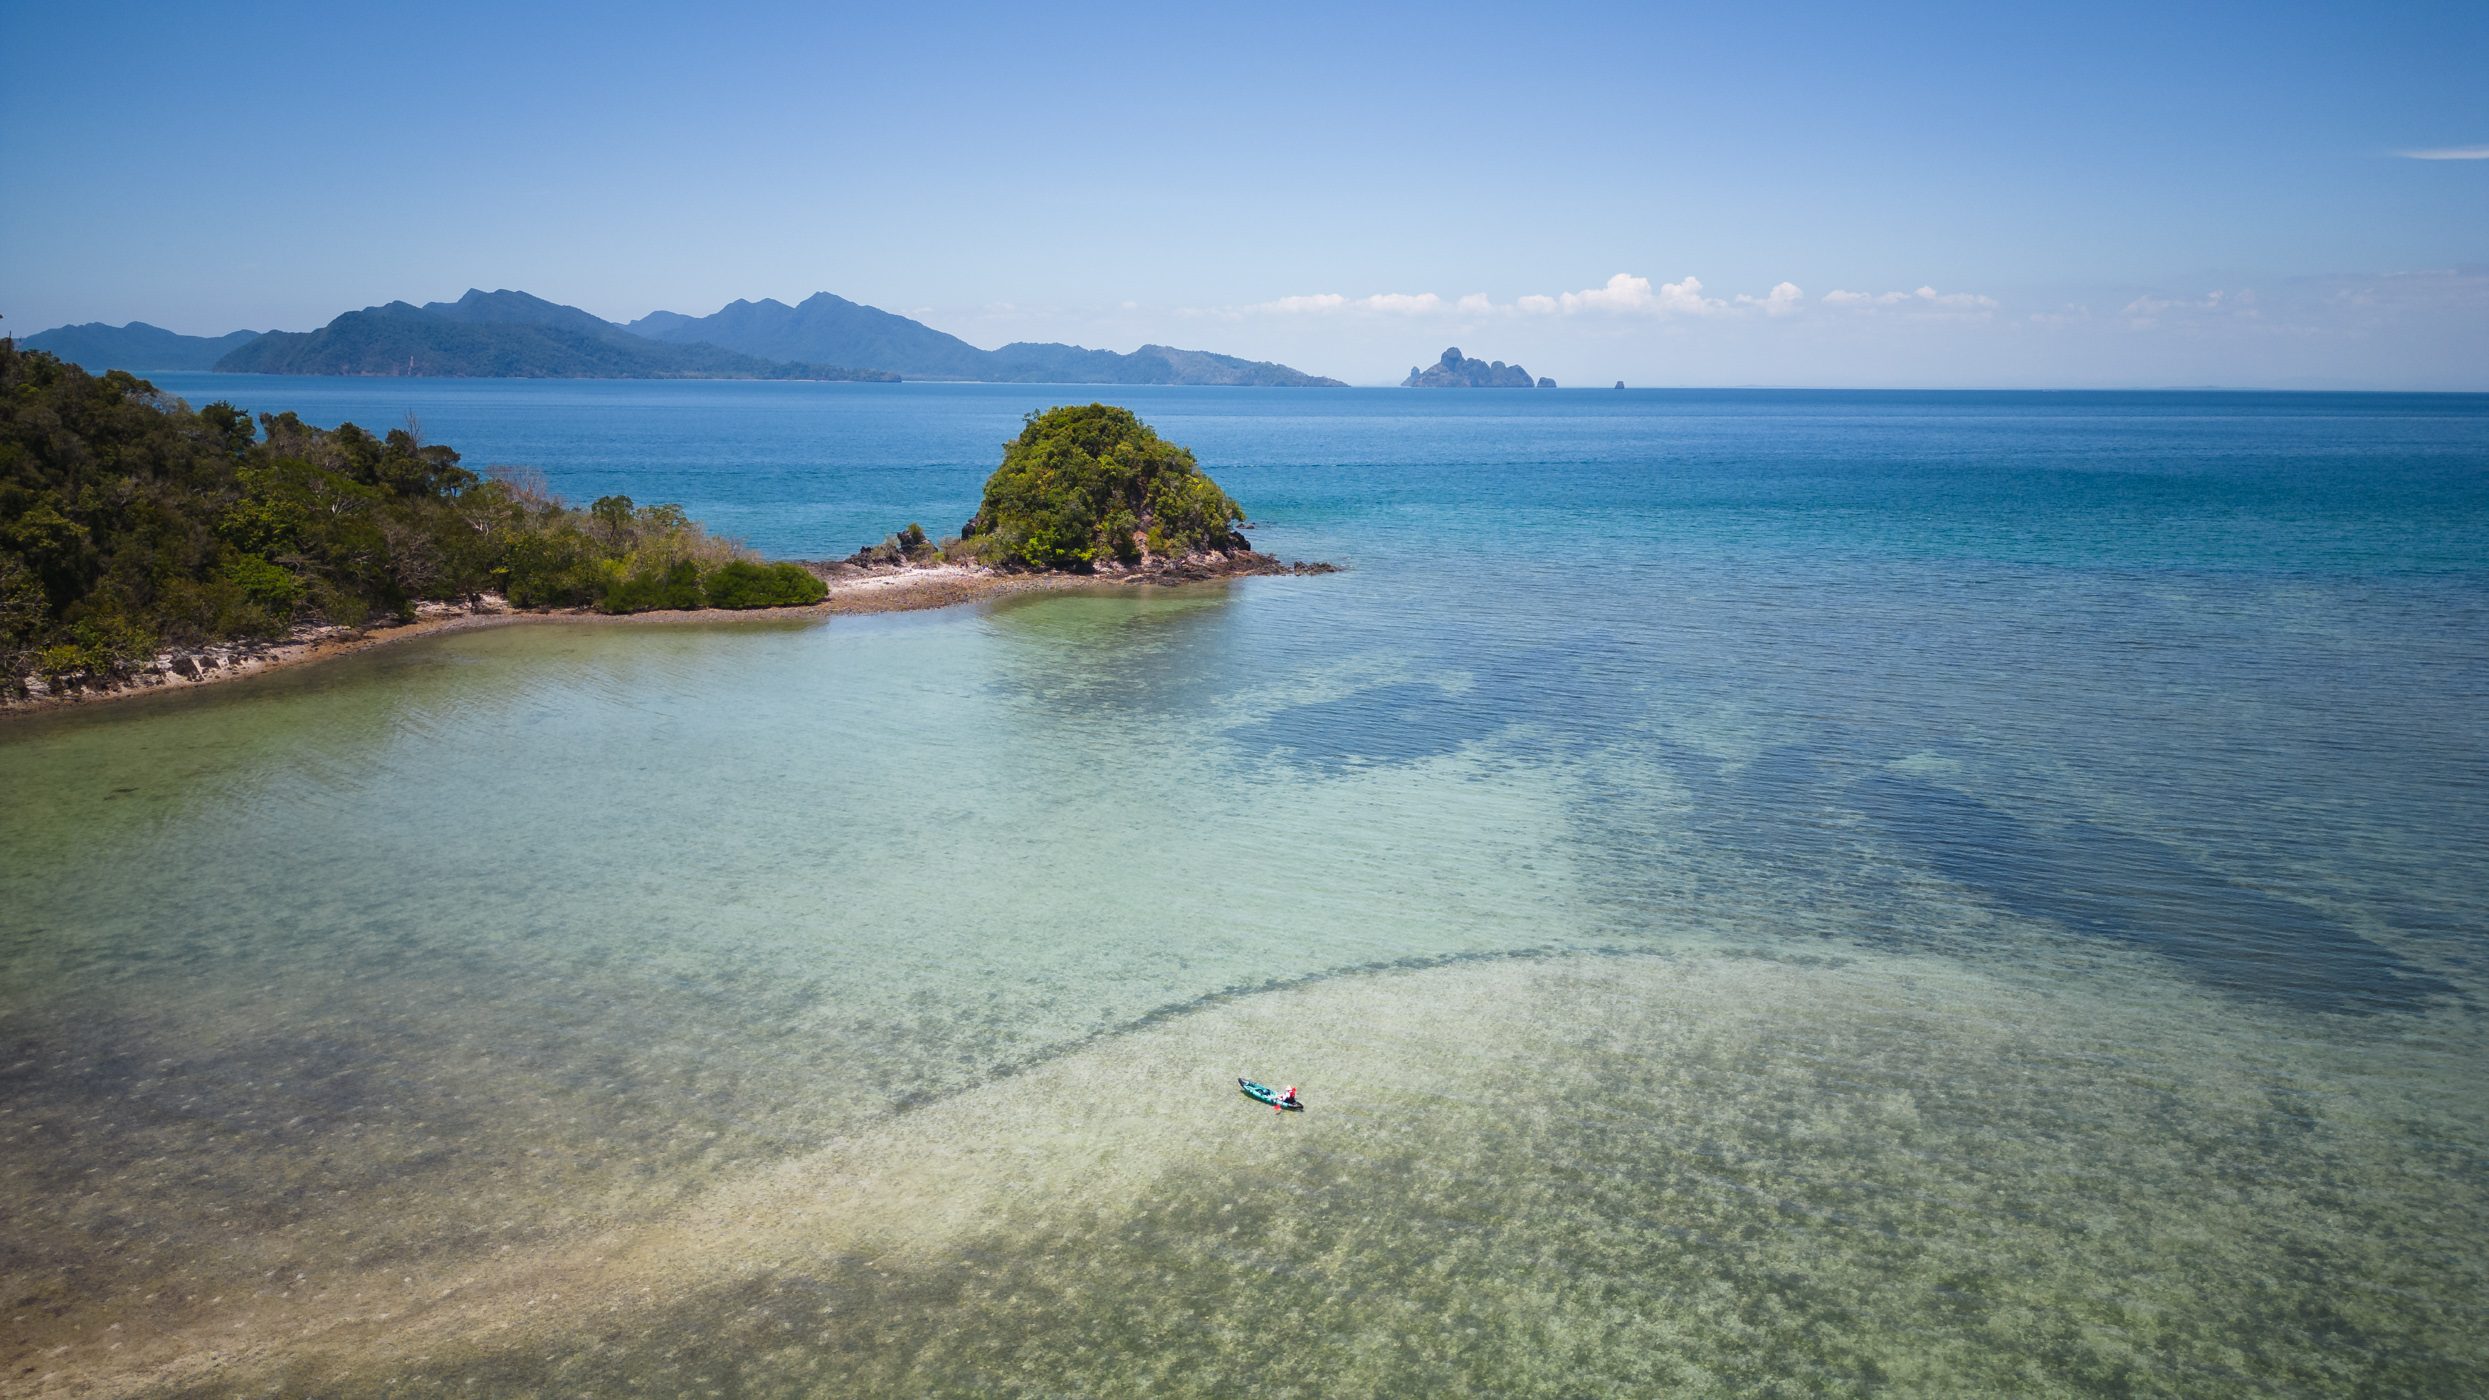 Bay of The Datai Langkawi - part of a 3 week Malaysia itinerary